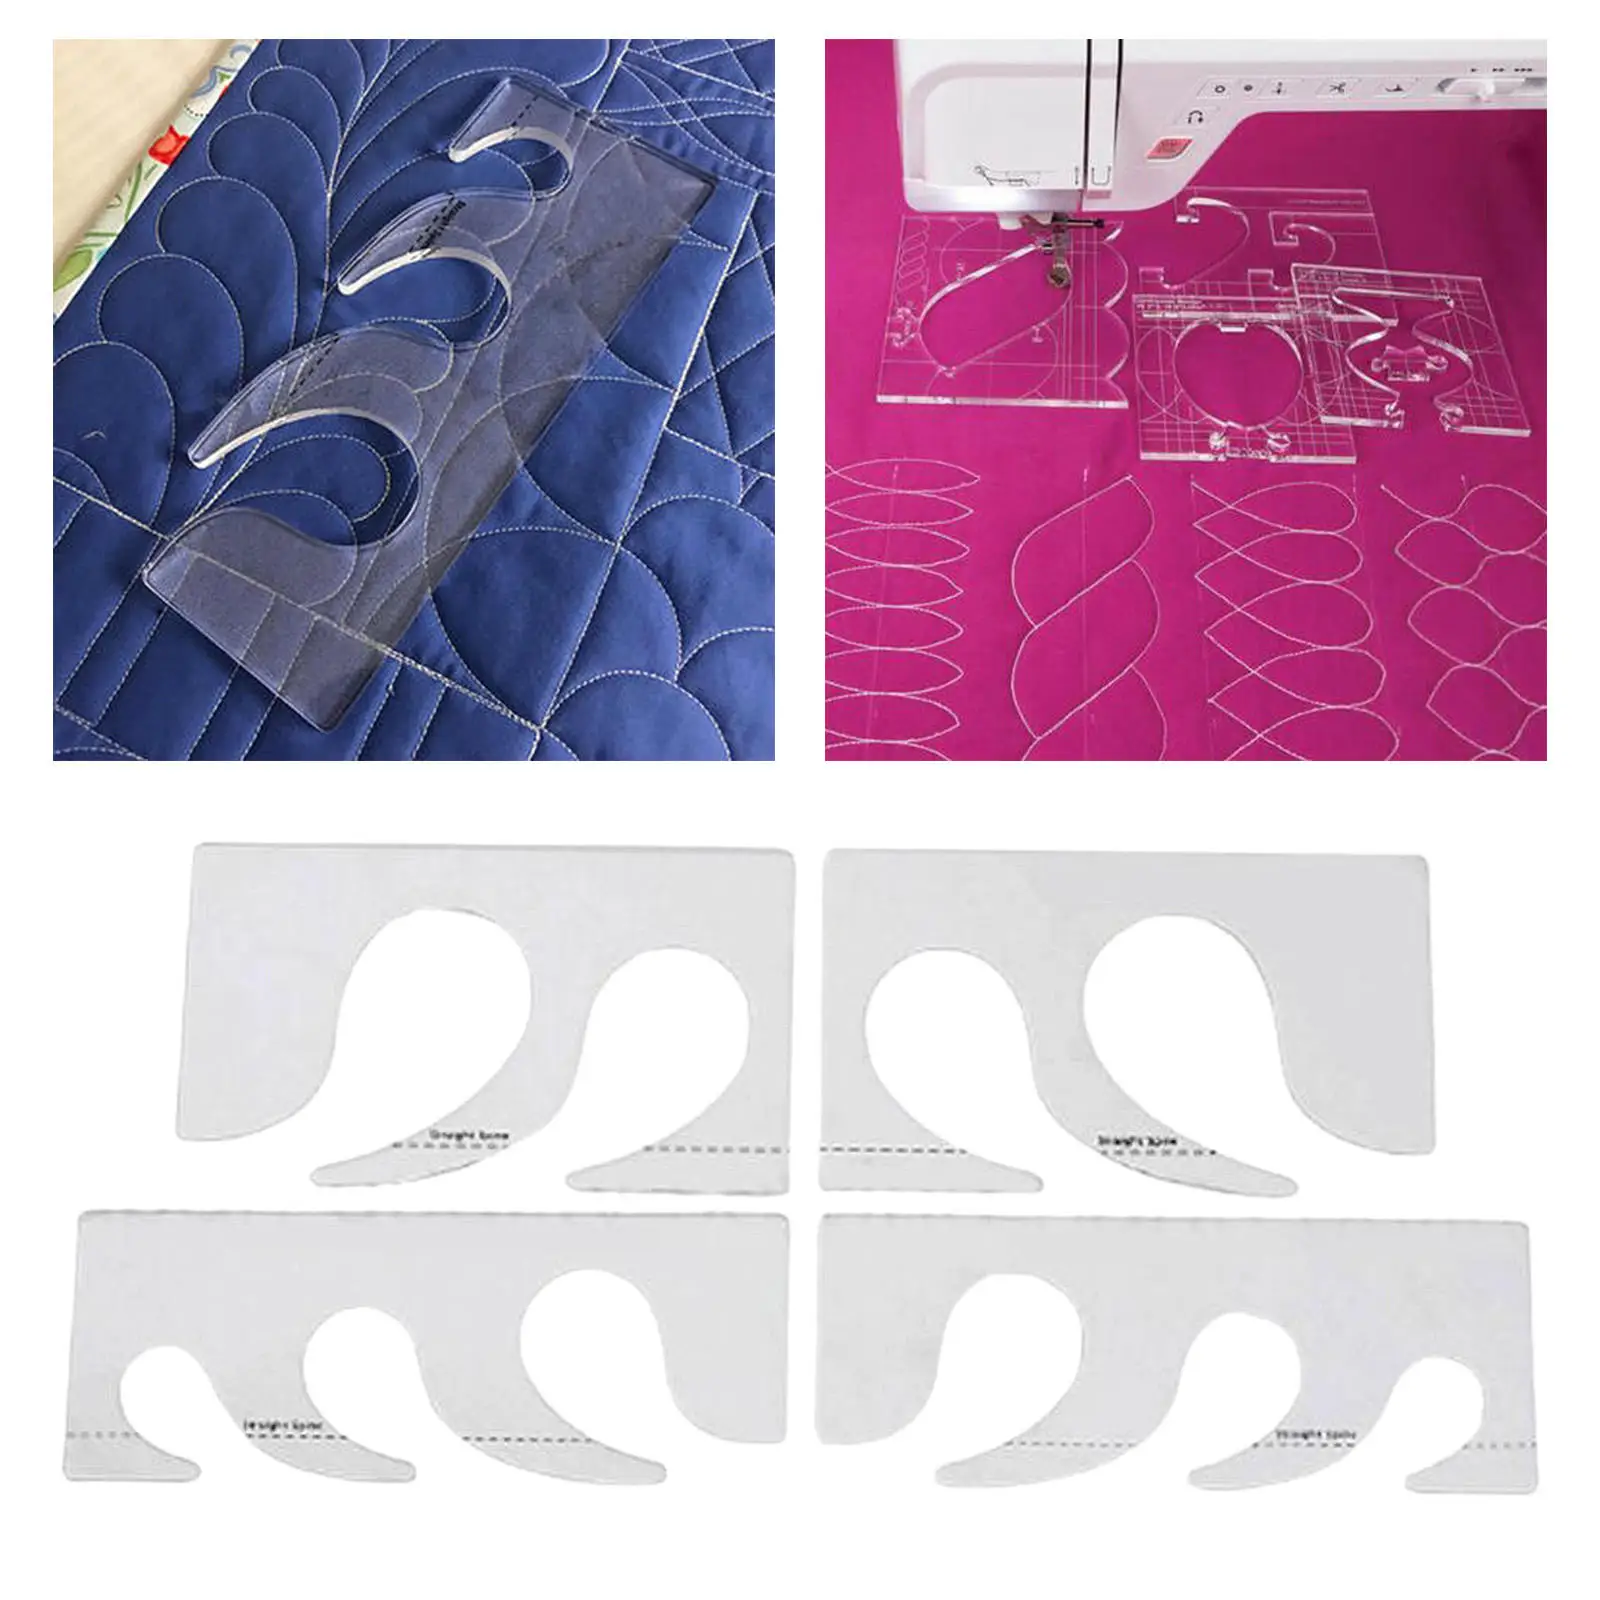 4pcs Sturdy Acrylic Quilting Ruler, Sew Machine Quilting Grids Lines Patchwork Unique Shape for Quilting, Sewing Crafts